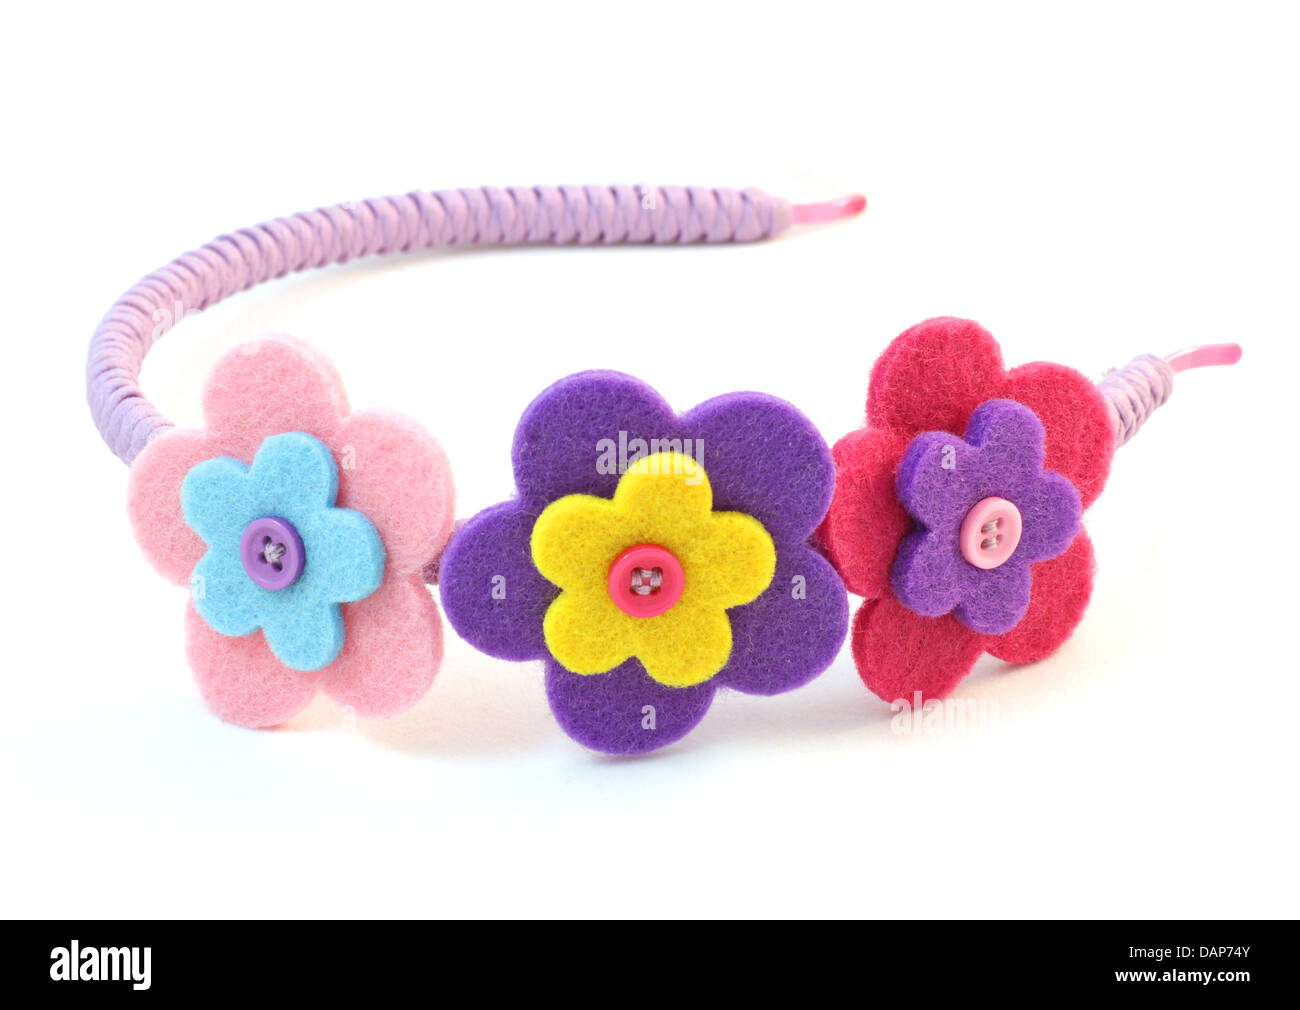 Lilac hair band with three felting flowers and buttons handmade on white background Stock Photo